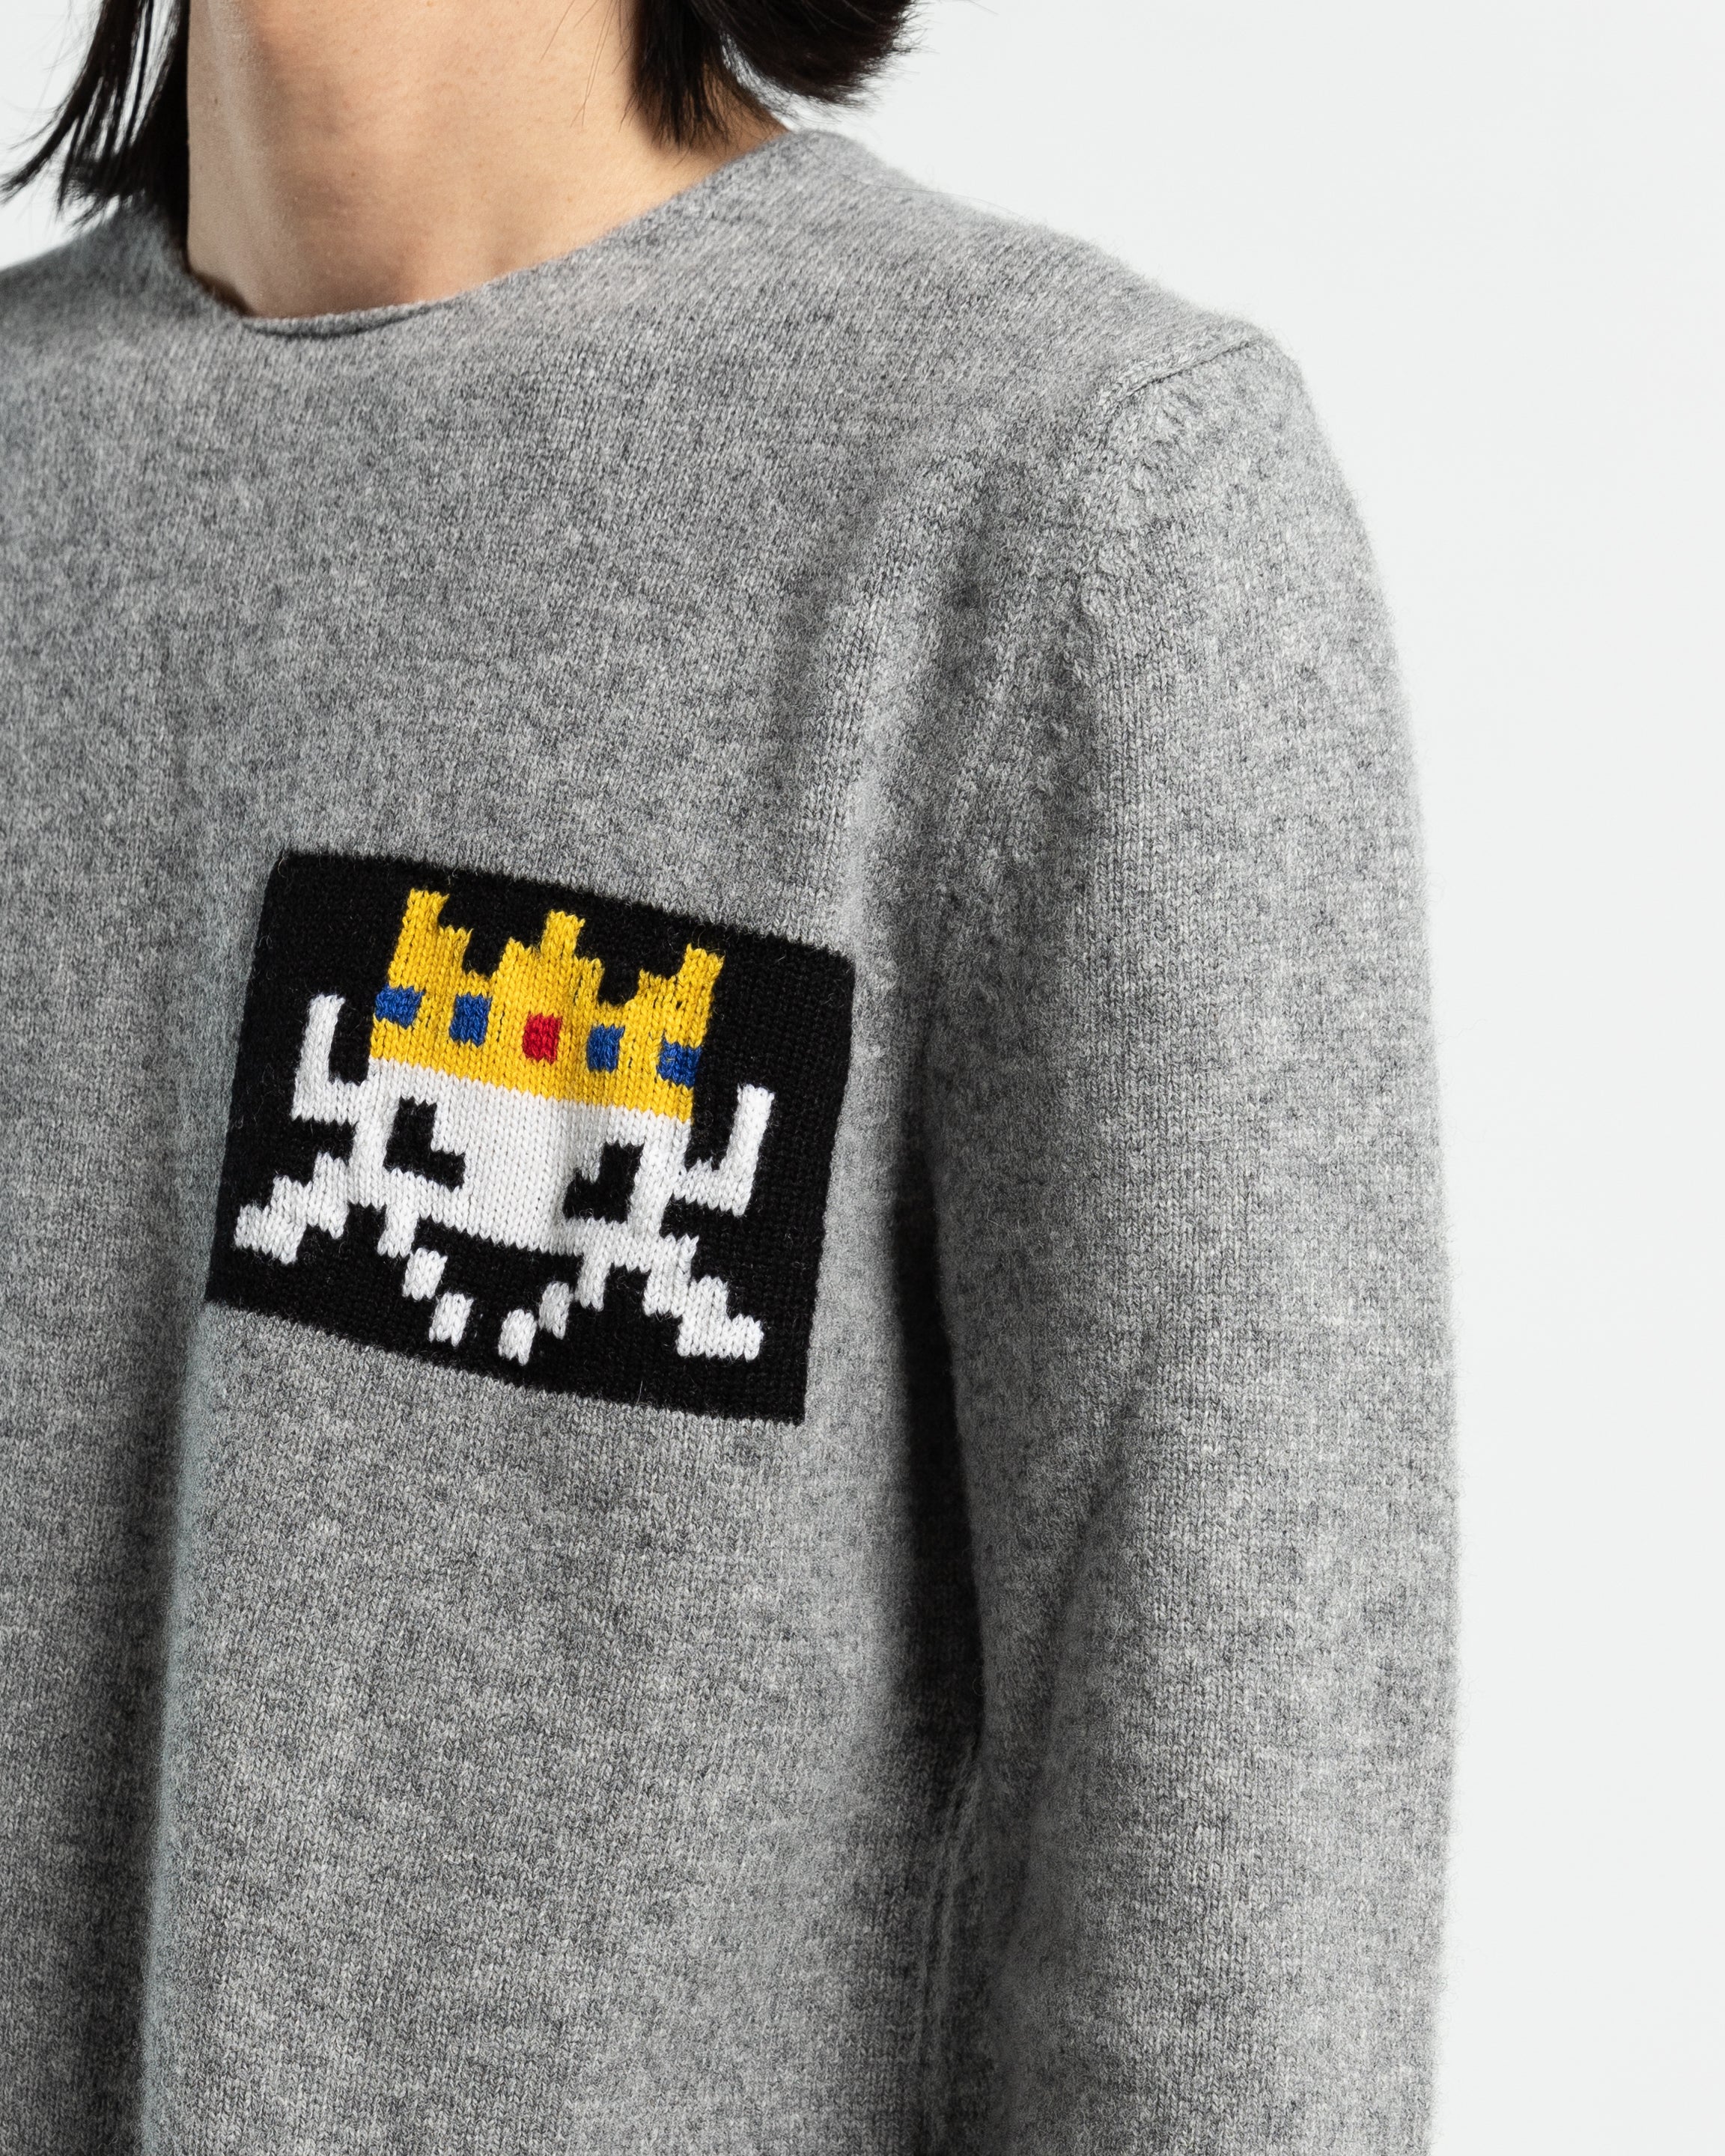 Knit Invader Sweater in Grey